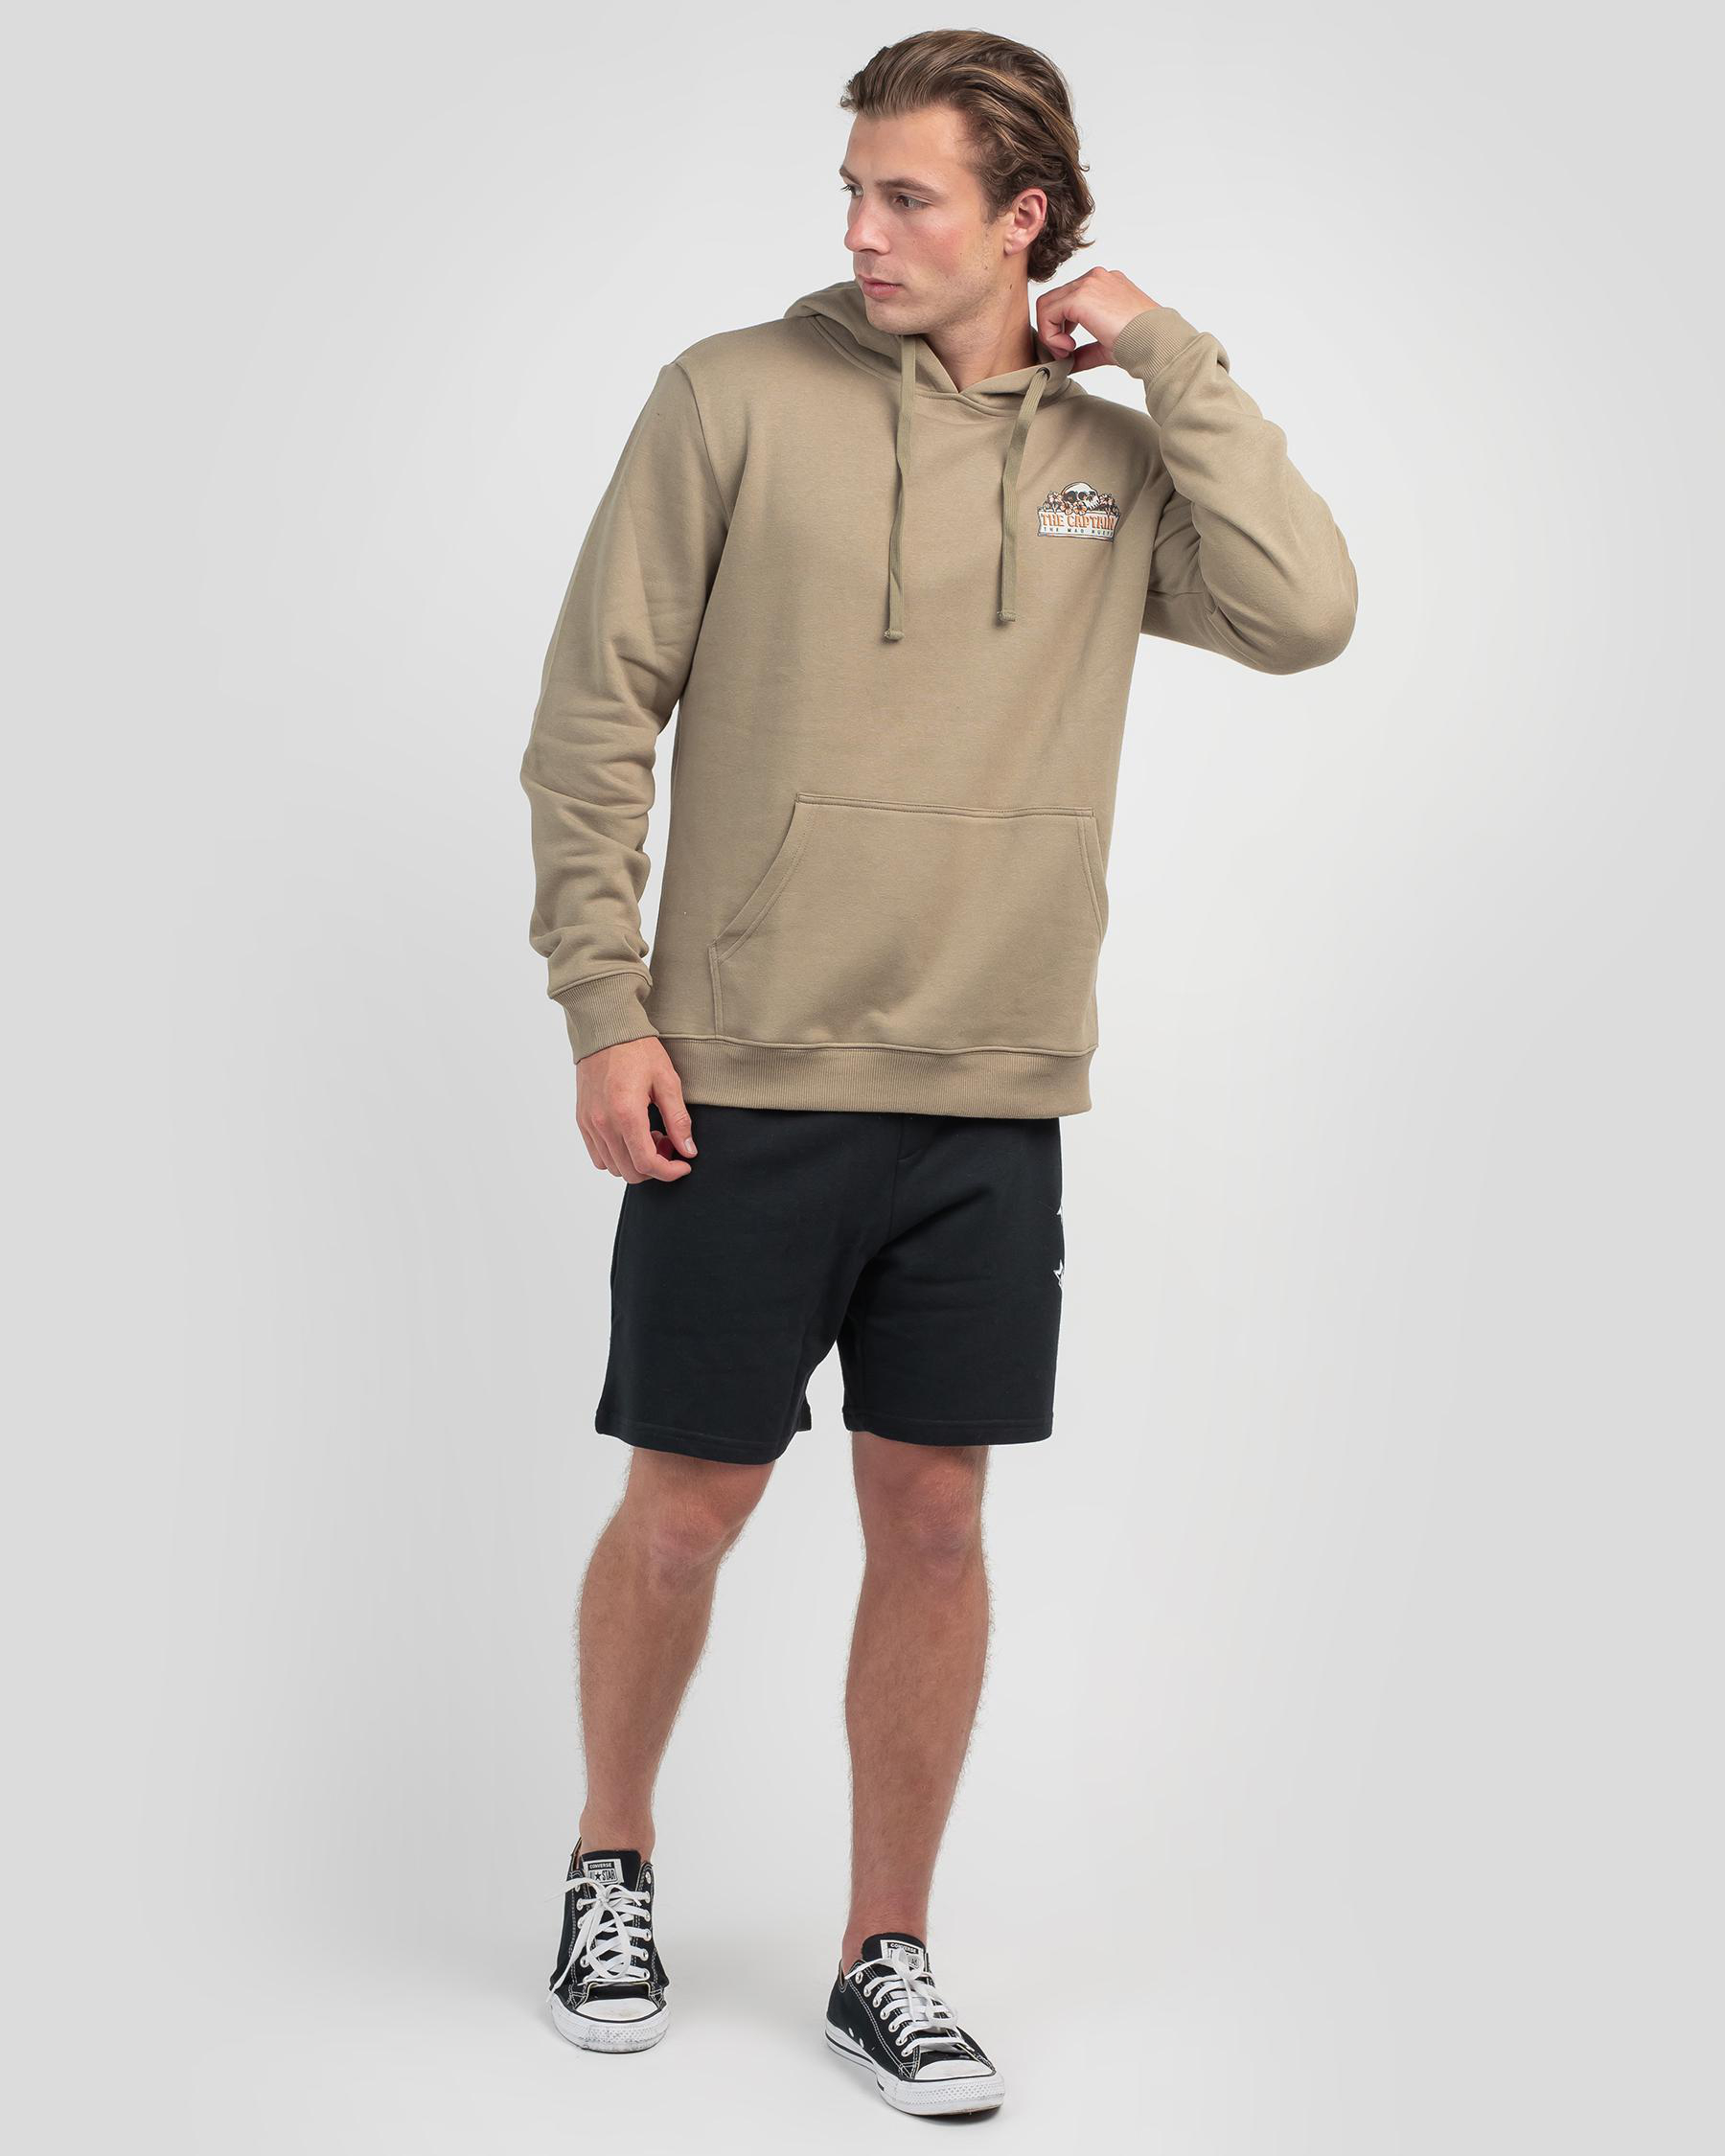 The Mad Hueys Tropic Captain Hoodie In Khaki - Fast Shipping & Easy ...